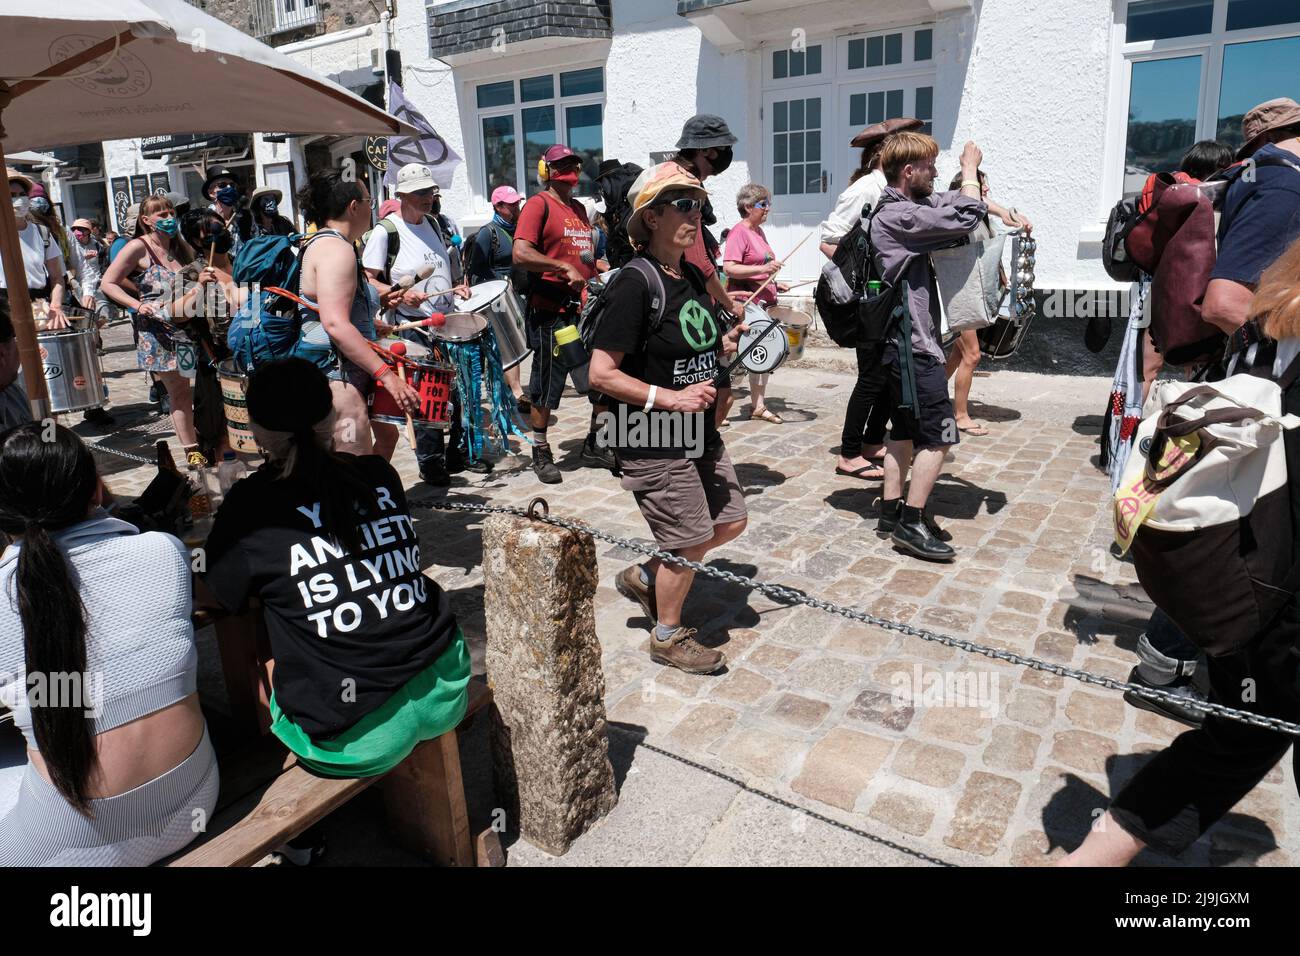 A samba band plays along the seafront in St Ives during the 'All Hands On Deck' day of action on the final day of the G7 summit in Cornwall. The theme is a reference to the Extinction Rebellion's third demand for a Citizens' Assembly on ecological and climate justice to move beyond broken parliamentary democracy and place power in the hands of citizens. Stock Photo